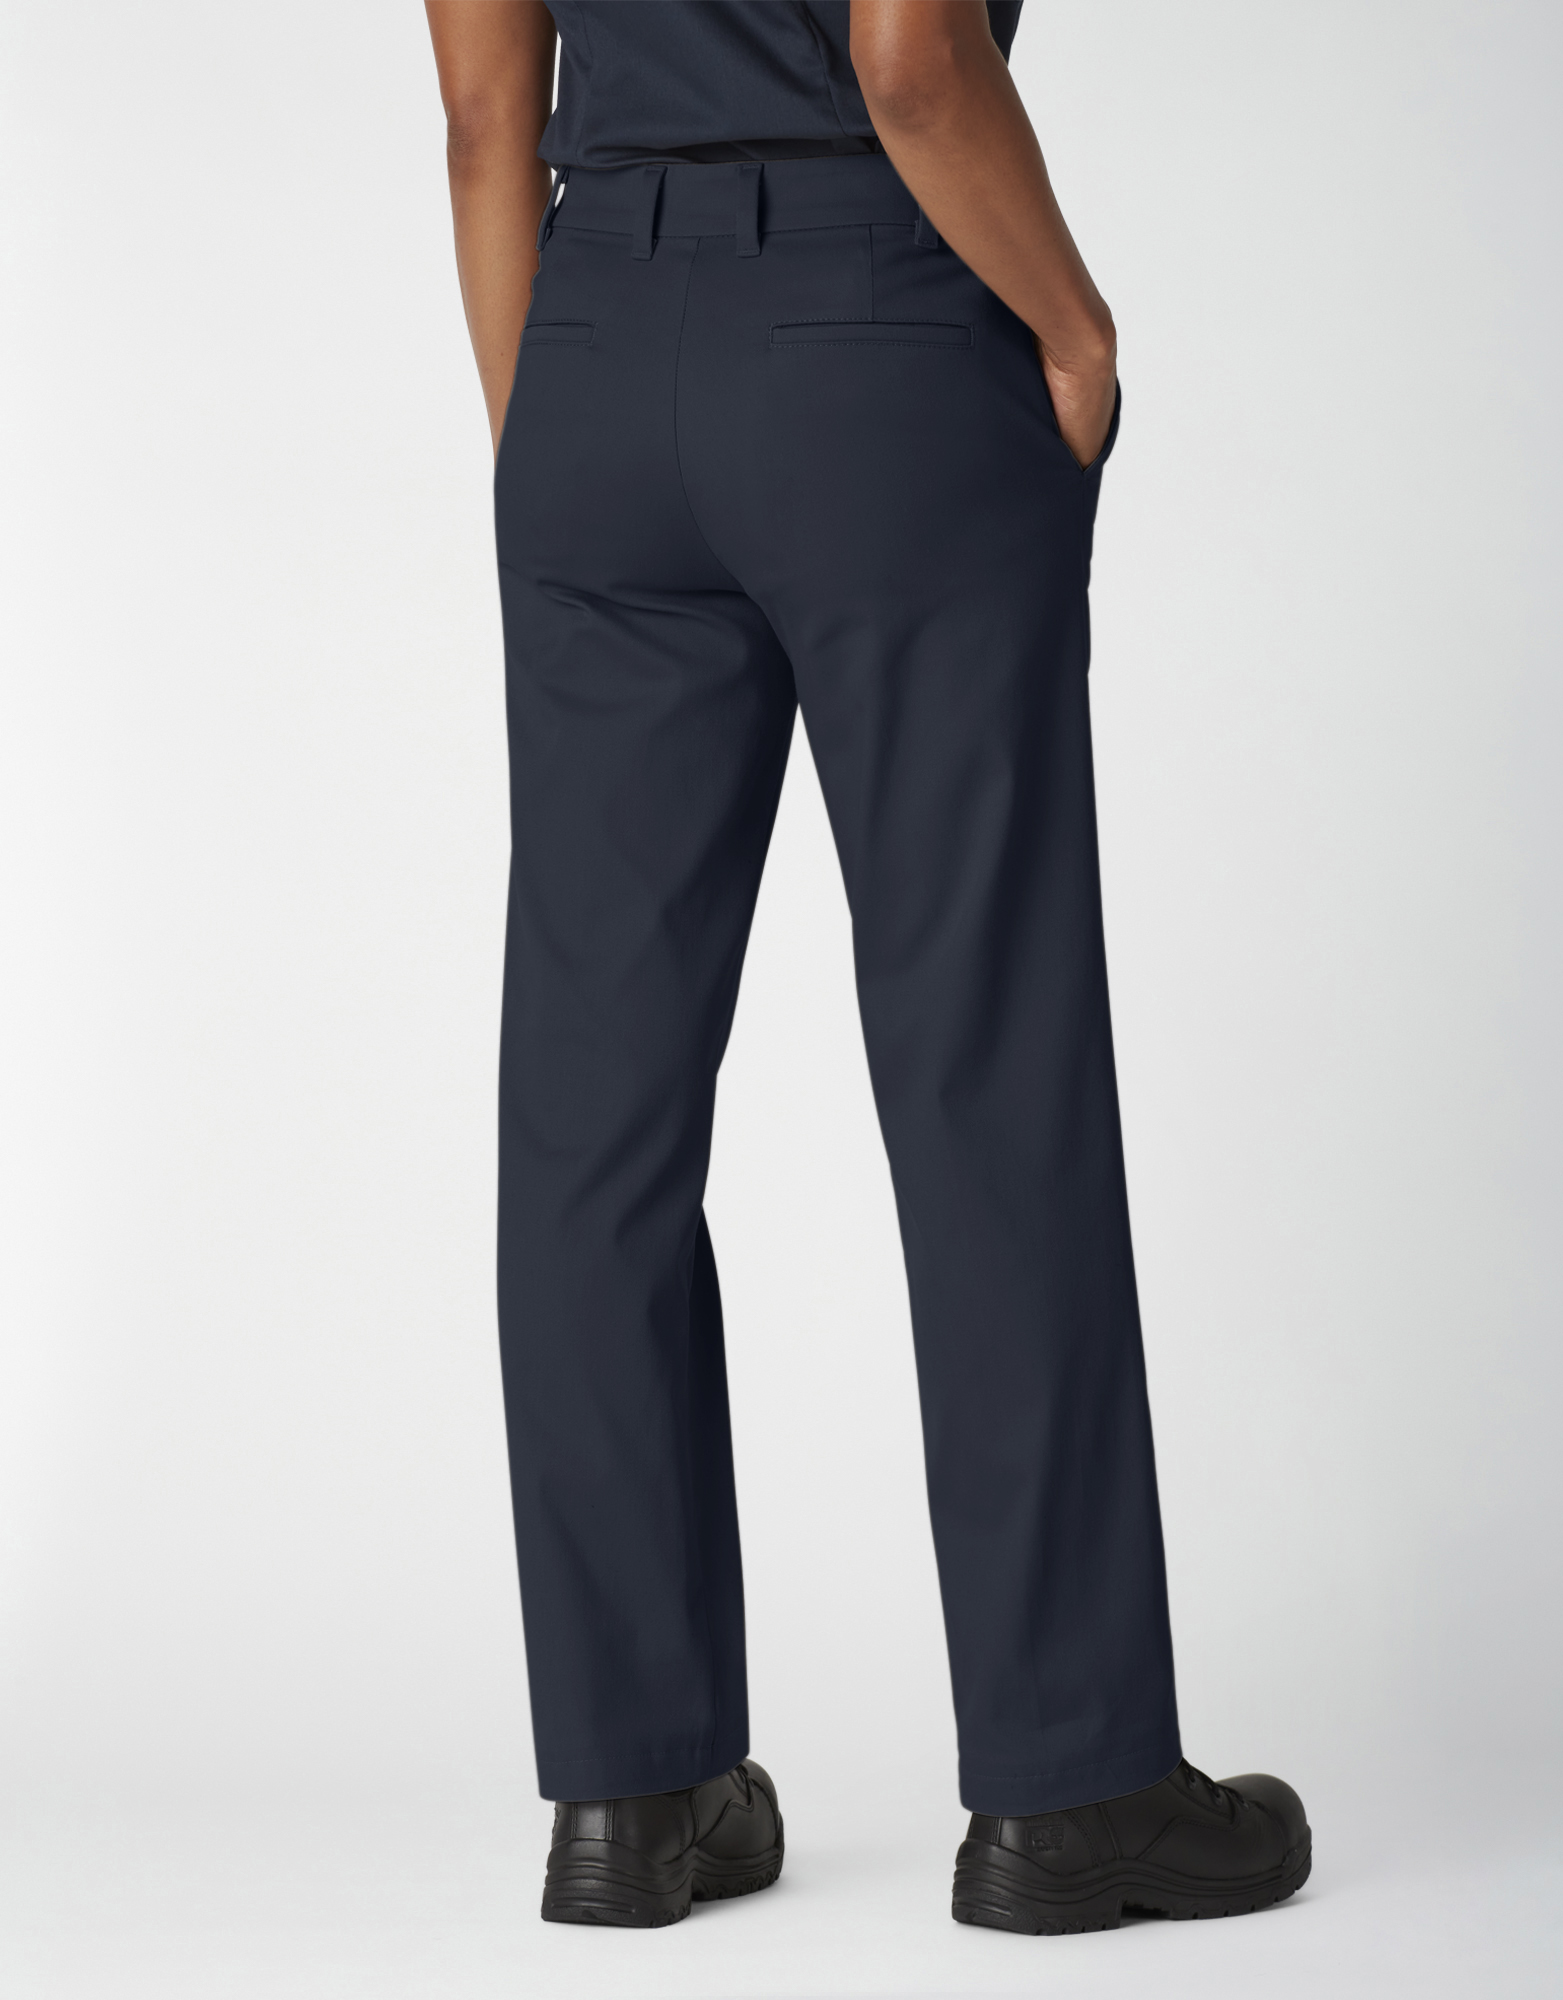 Genuine Dickies Women's Perfectly Slimming High Rise Service Pant ...